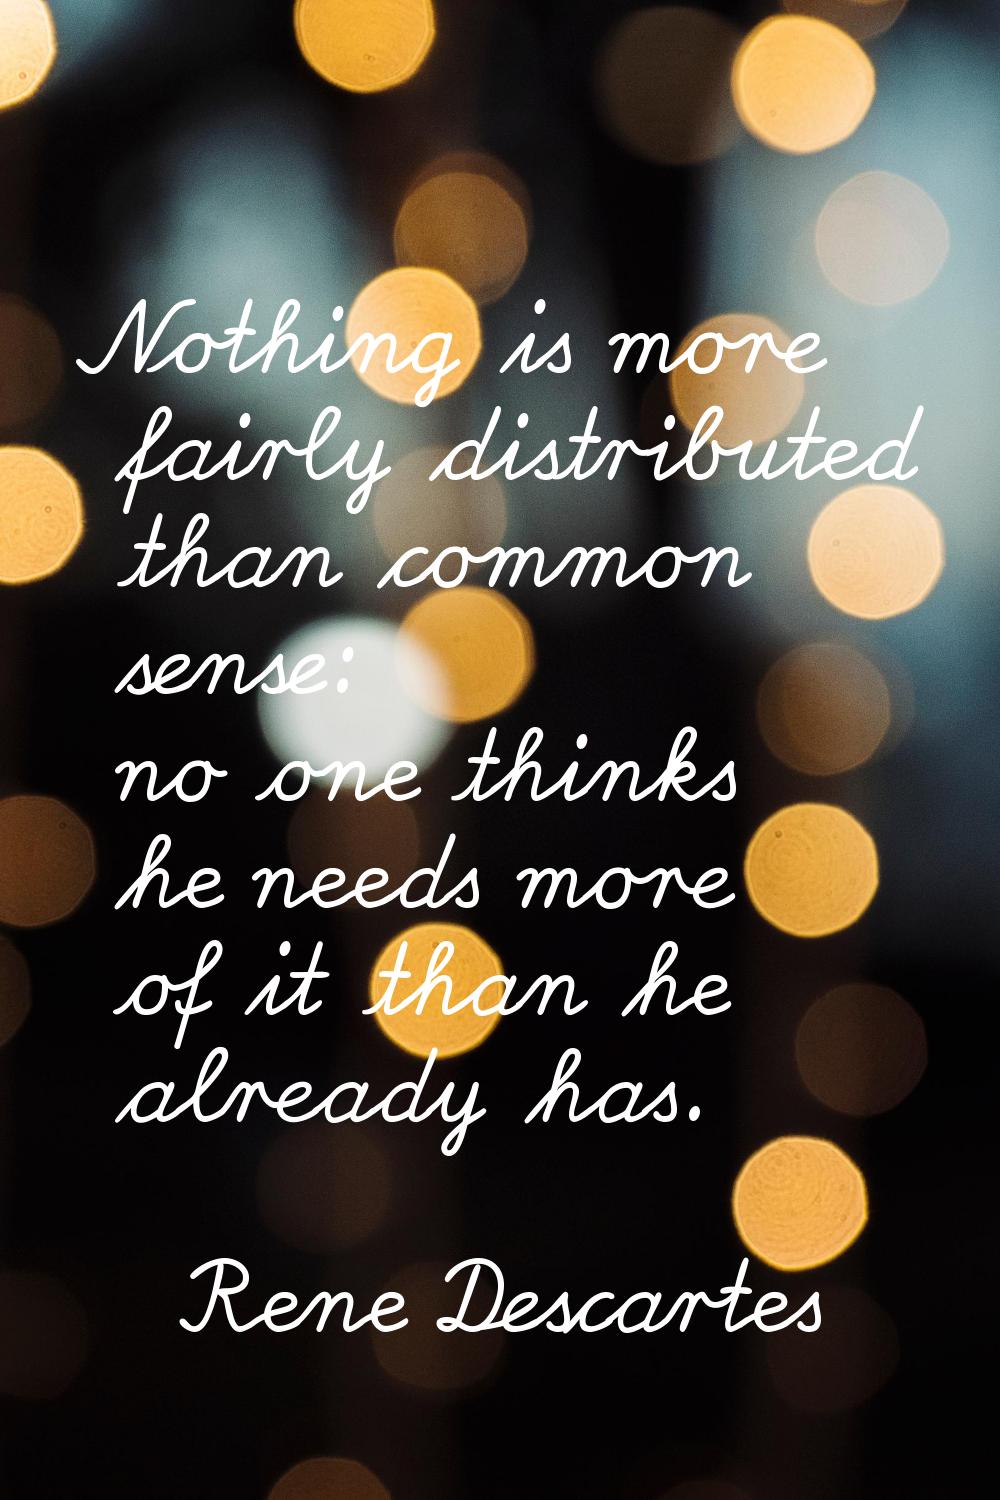 Nothing is more fairly distributed than common sense: no one thinks he needs more of it than he alr